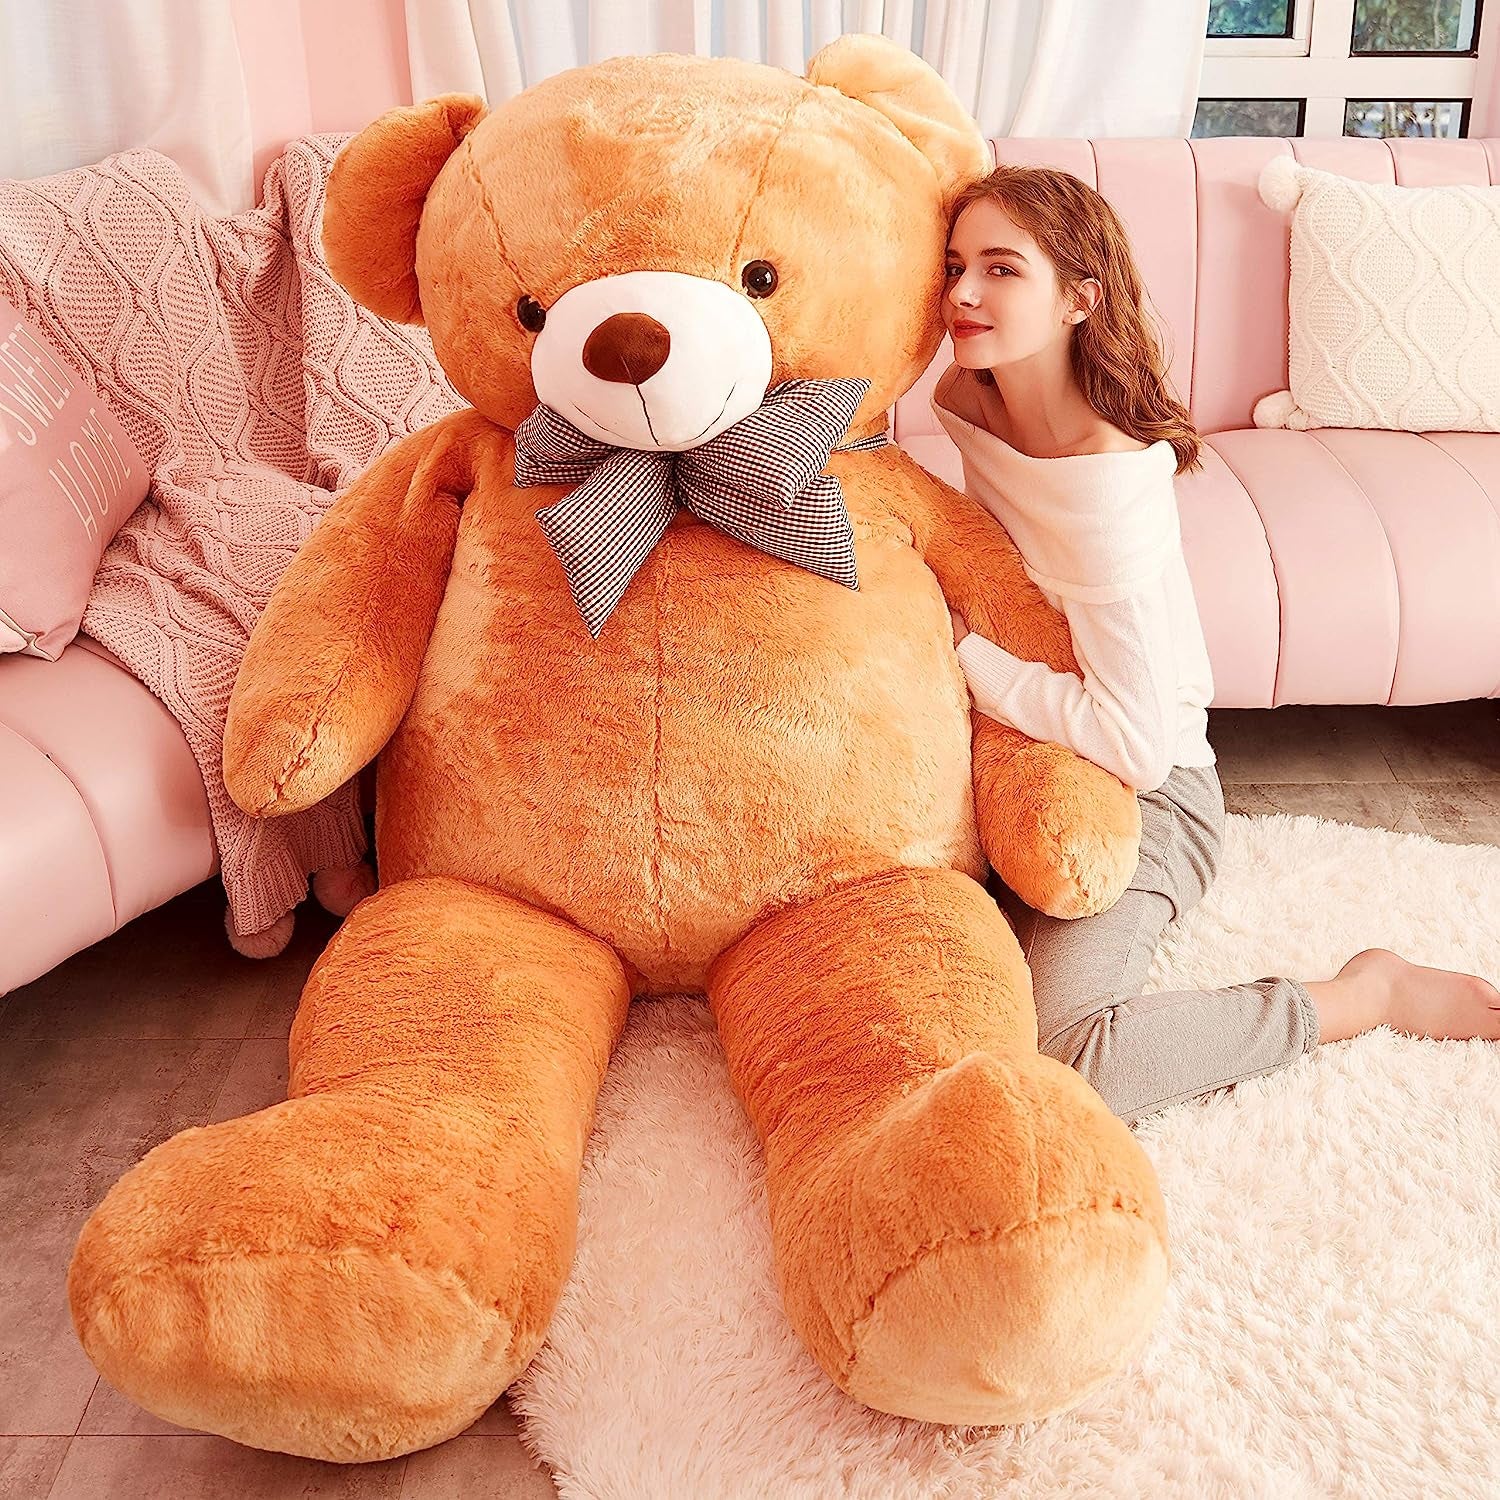 Giant Teddy Bear Plush Toy Stuffed Animals (Brown, 70 Inches)